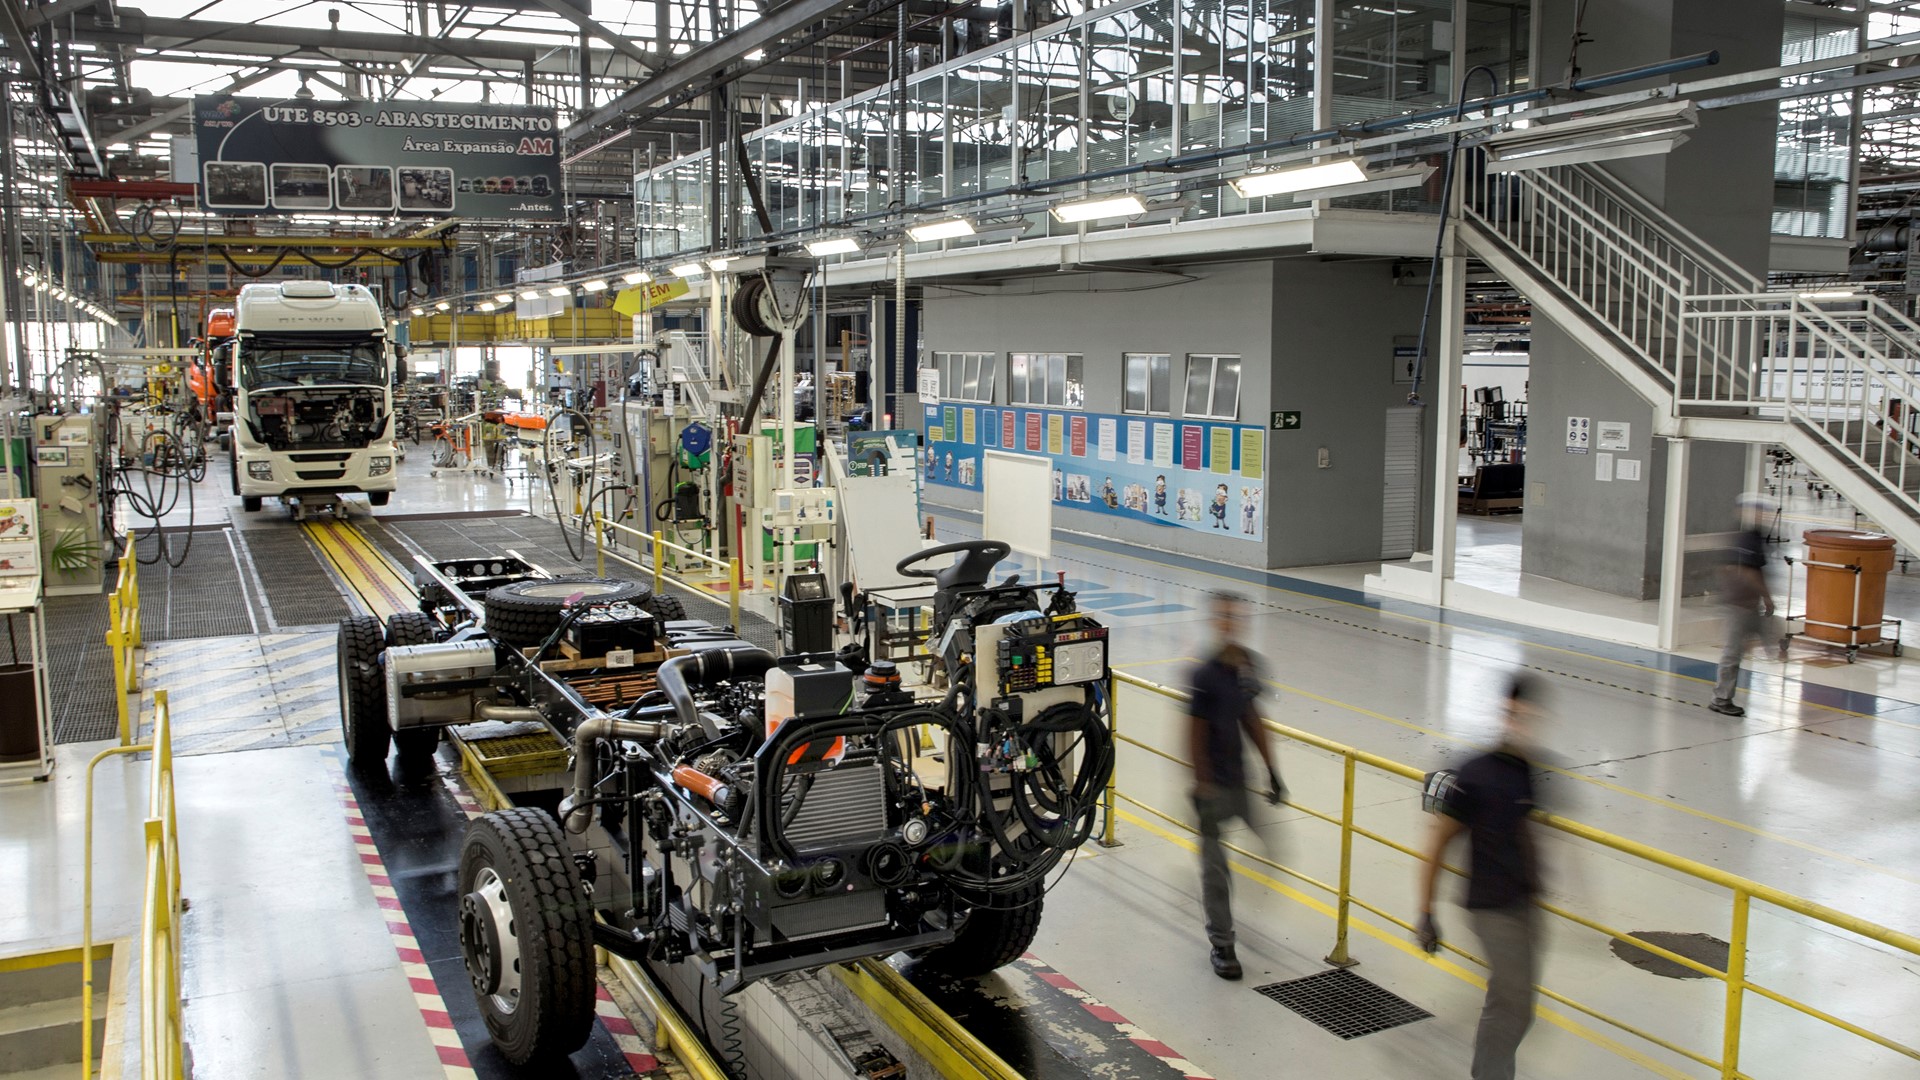 The IVECO commercial vehicles manufacturing facility in Sete Lagoas Brazil